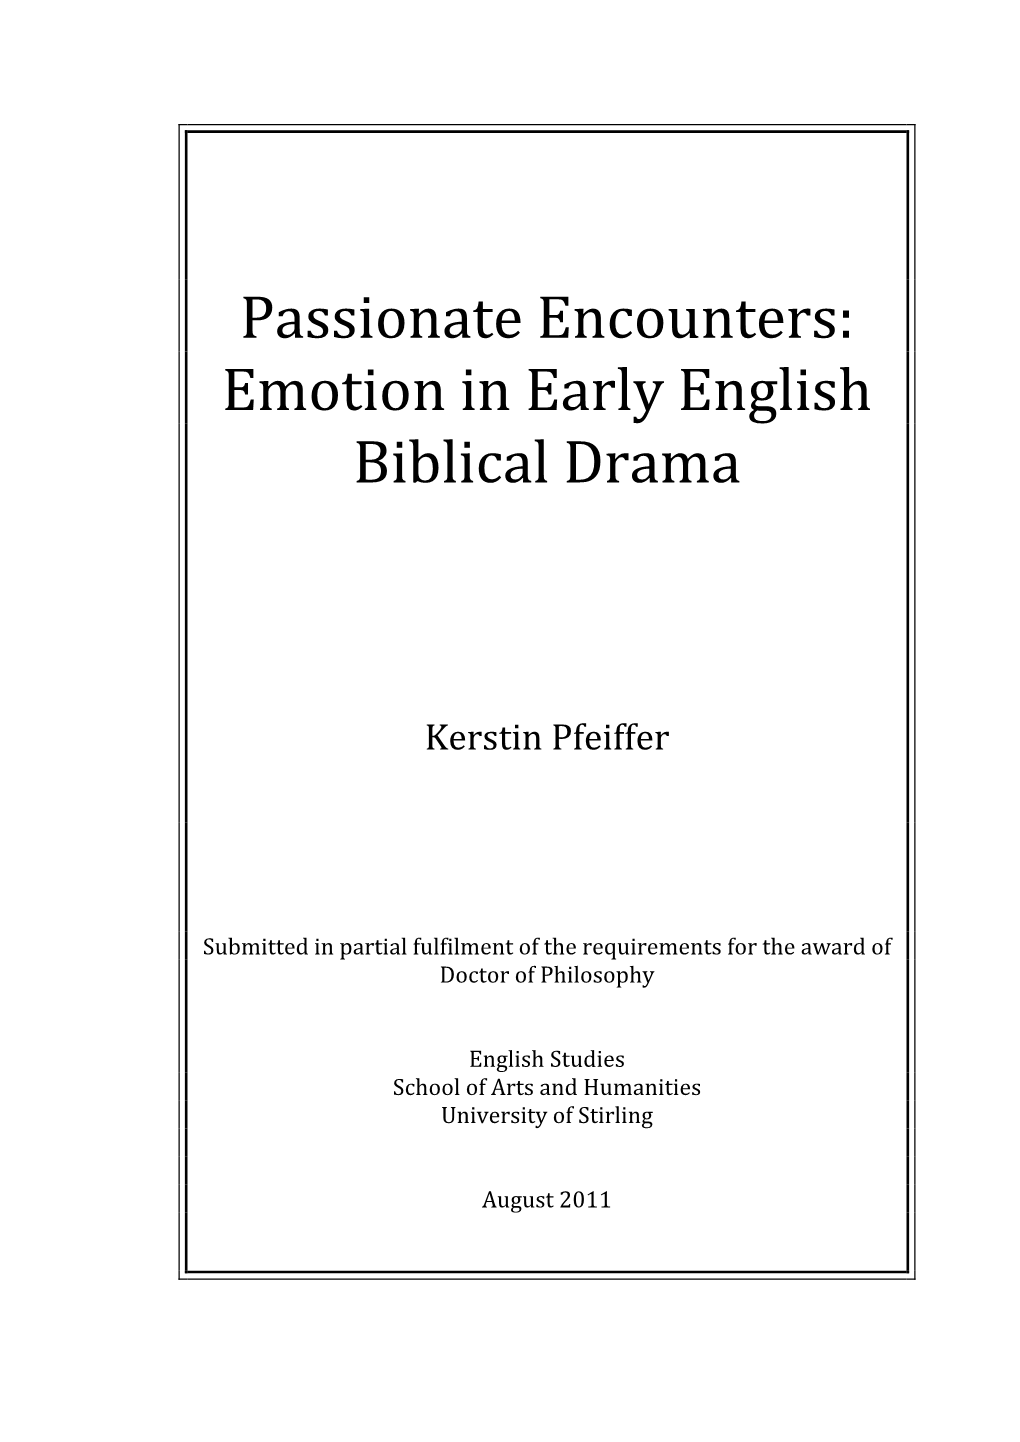 Passionate Encounters: Emotion in Early English Biblical Drama